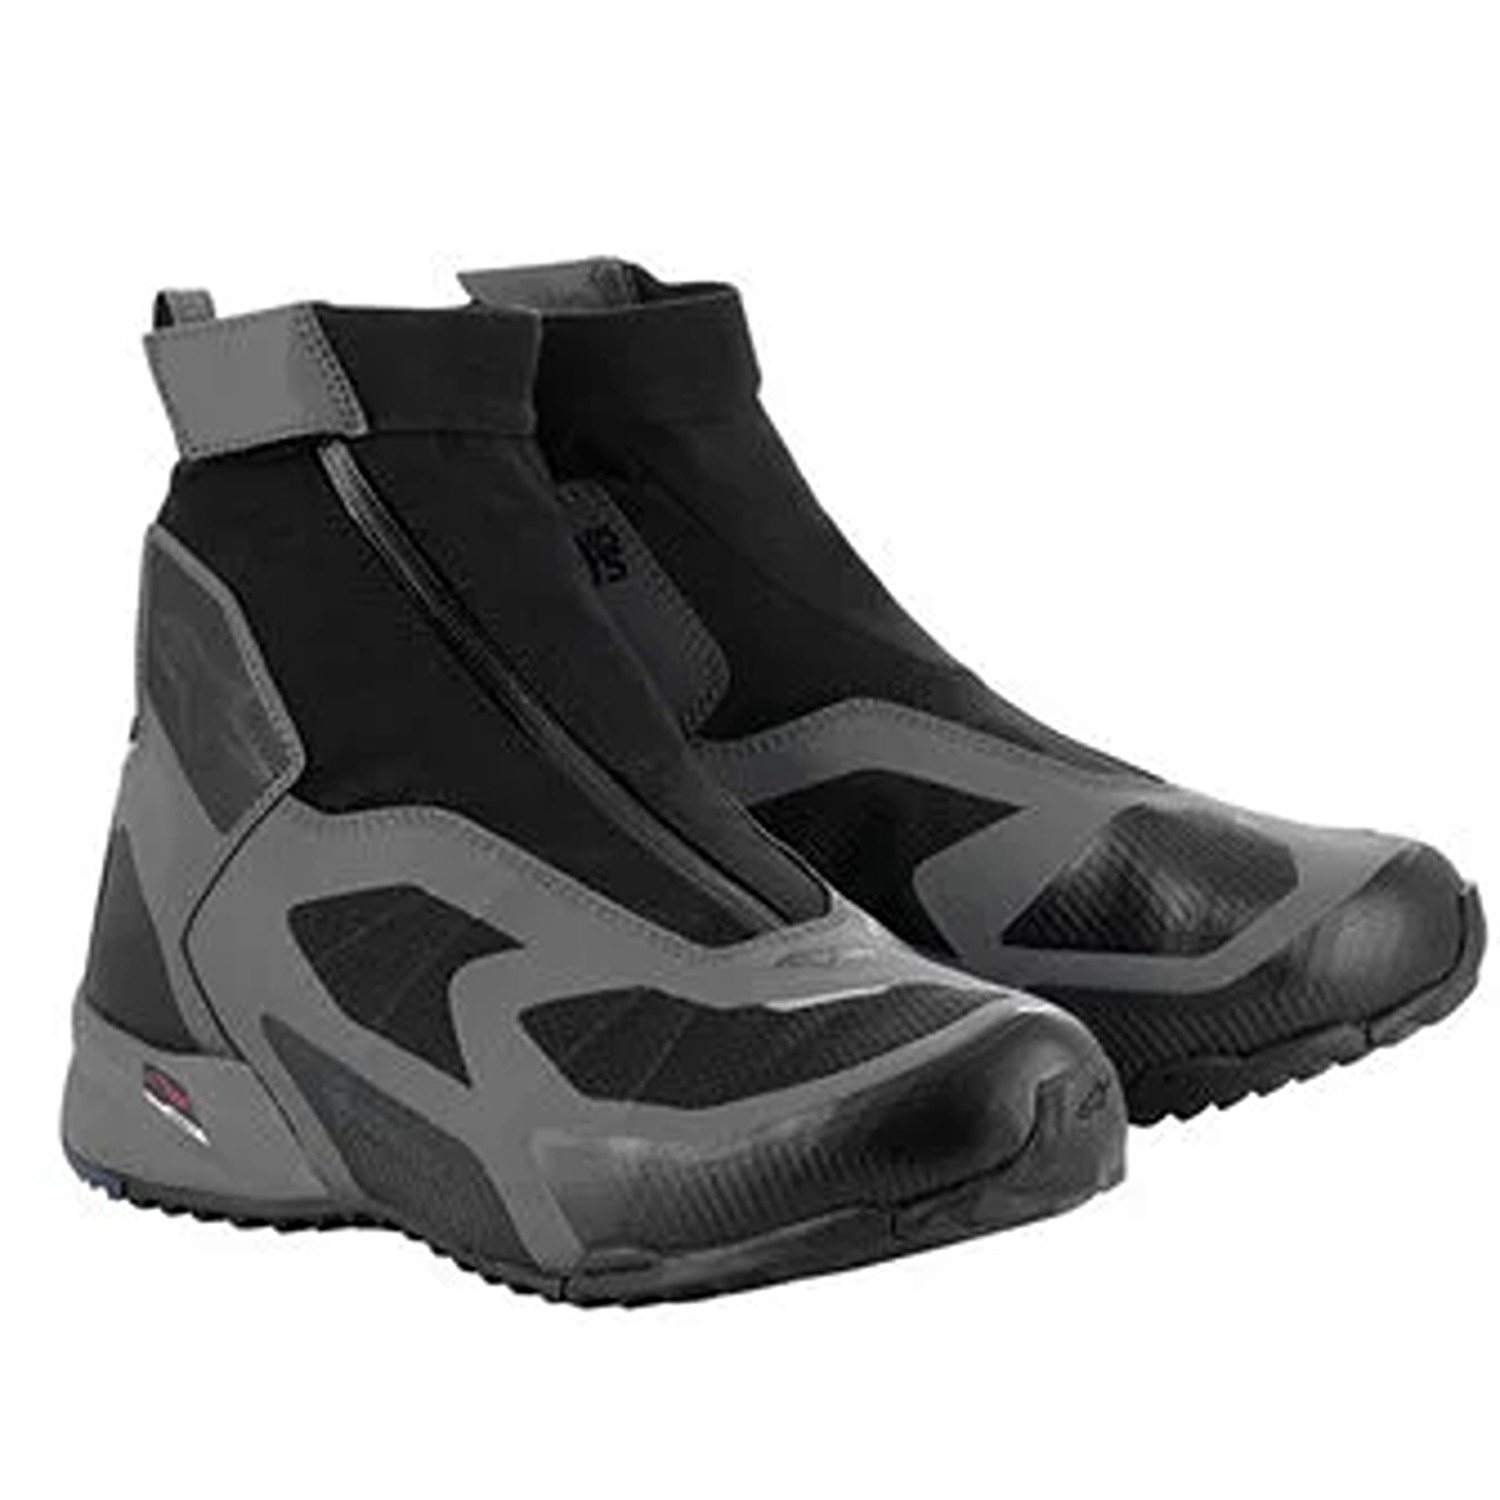 Image of Alpinestars CR-8 Gore-Tex Shoes Black Mid Gray Bright Red Size US 8 ID 8059347260167